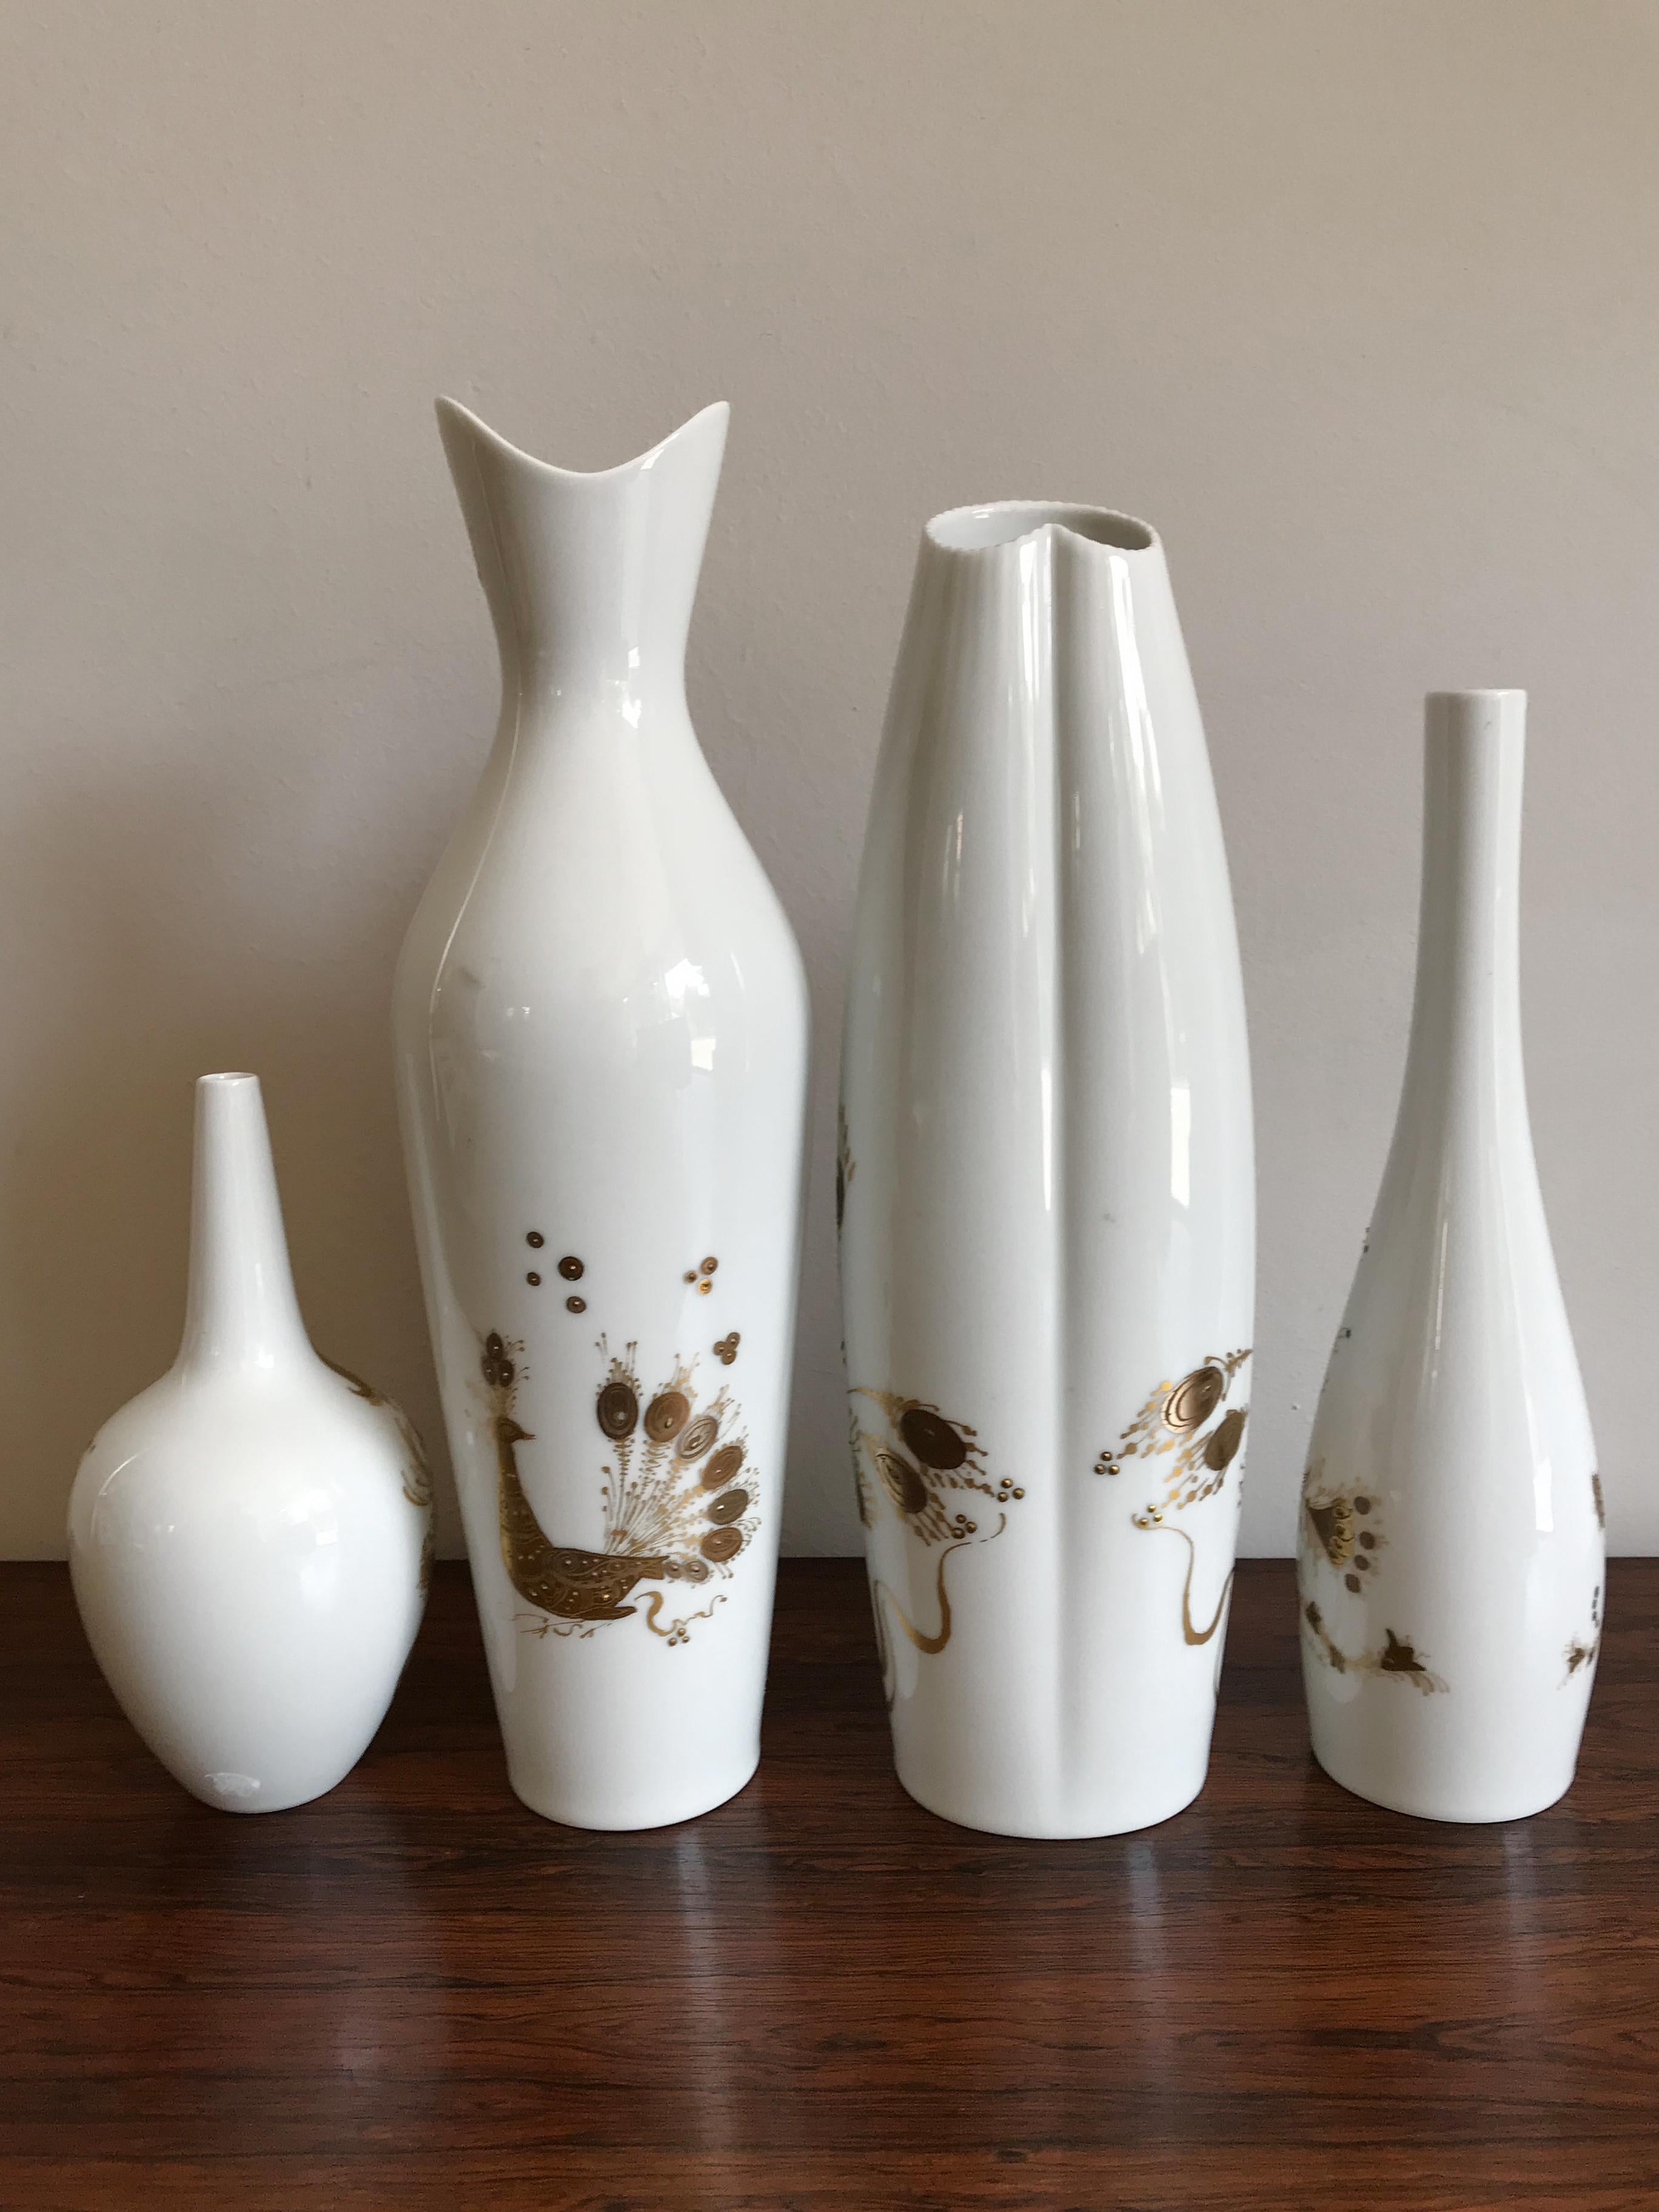 1960s porcelain vases set designed by Danish artist Bjorn Wiinblad for Rosenthal Studio Linie Quatre Couleurs with gold decoration and with mark printed on the bottom, midcentury modern design.
dimensions from the left:
height cm 19 - diameter cm